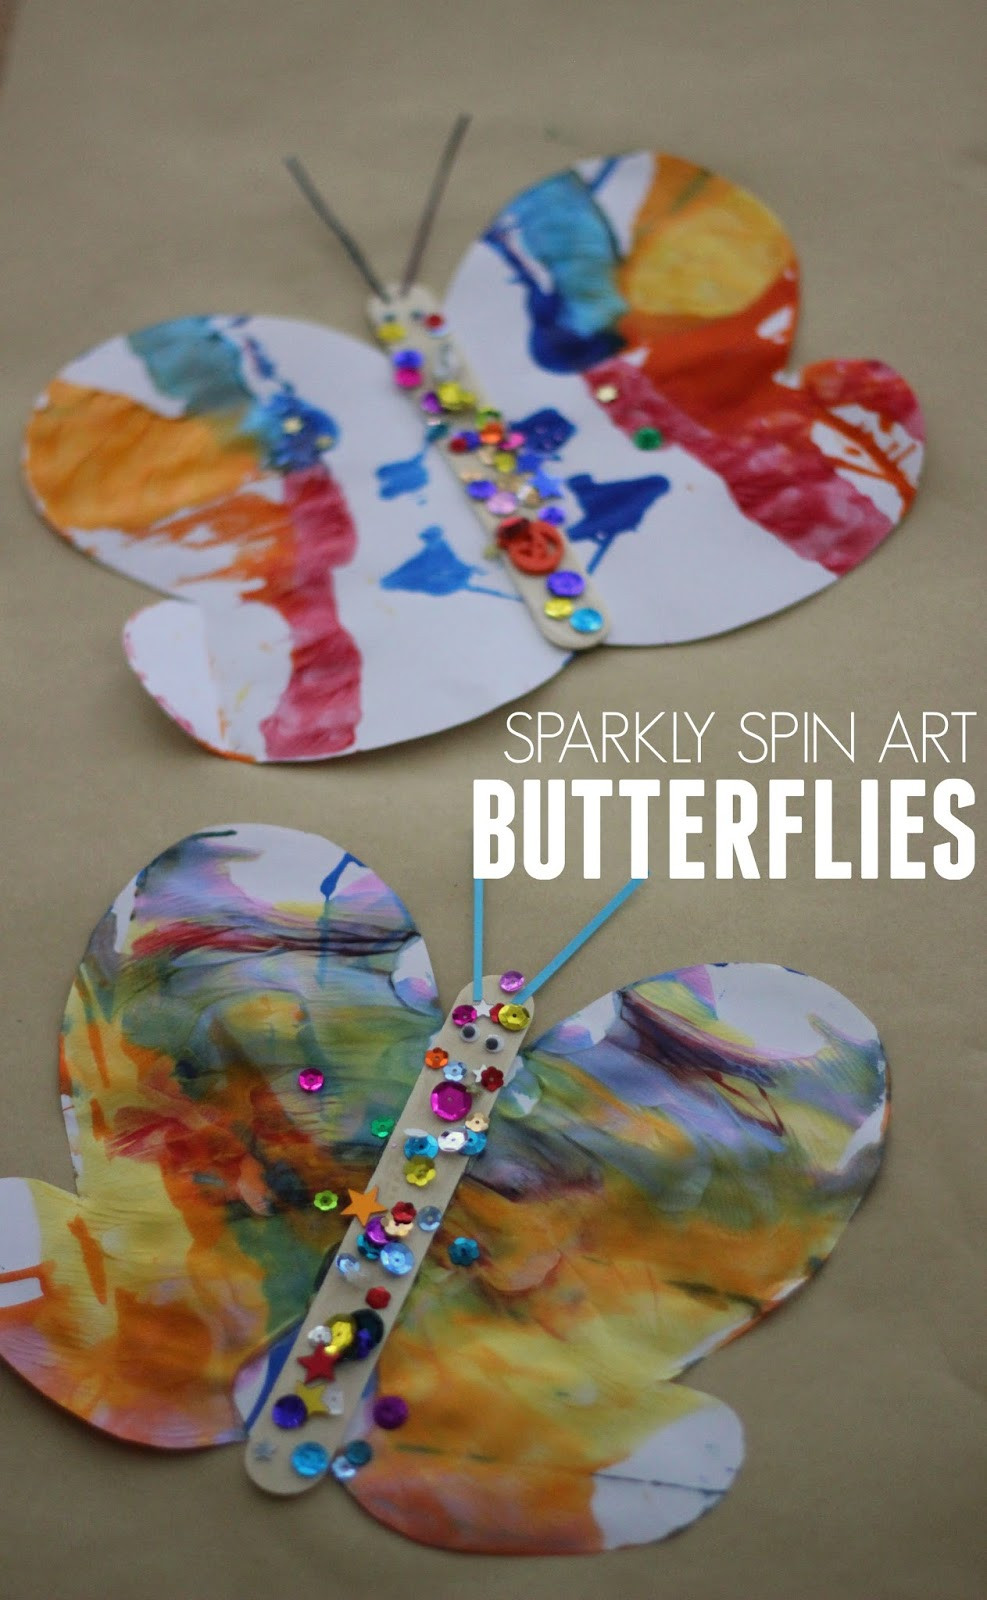 Easy Art Projects For Toddlers
 Toddler Approved Easy Sparkly Spin Art Butterflies